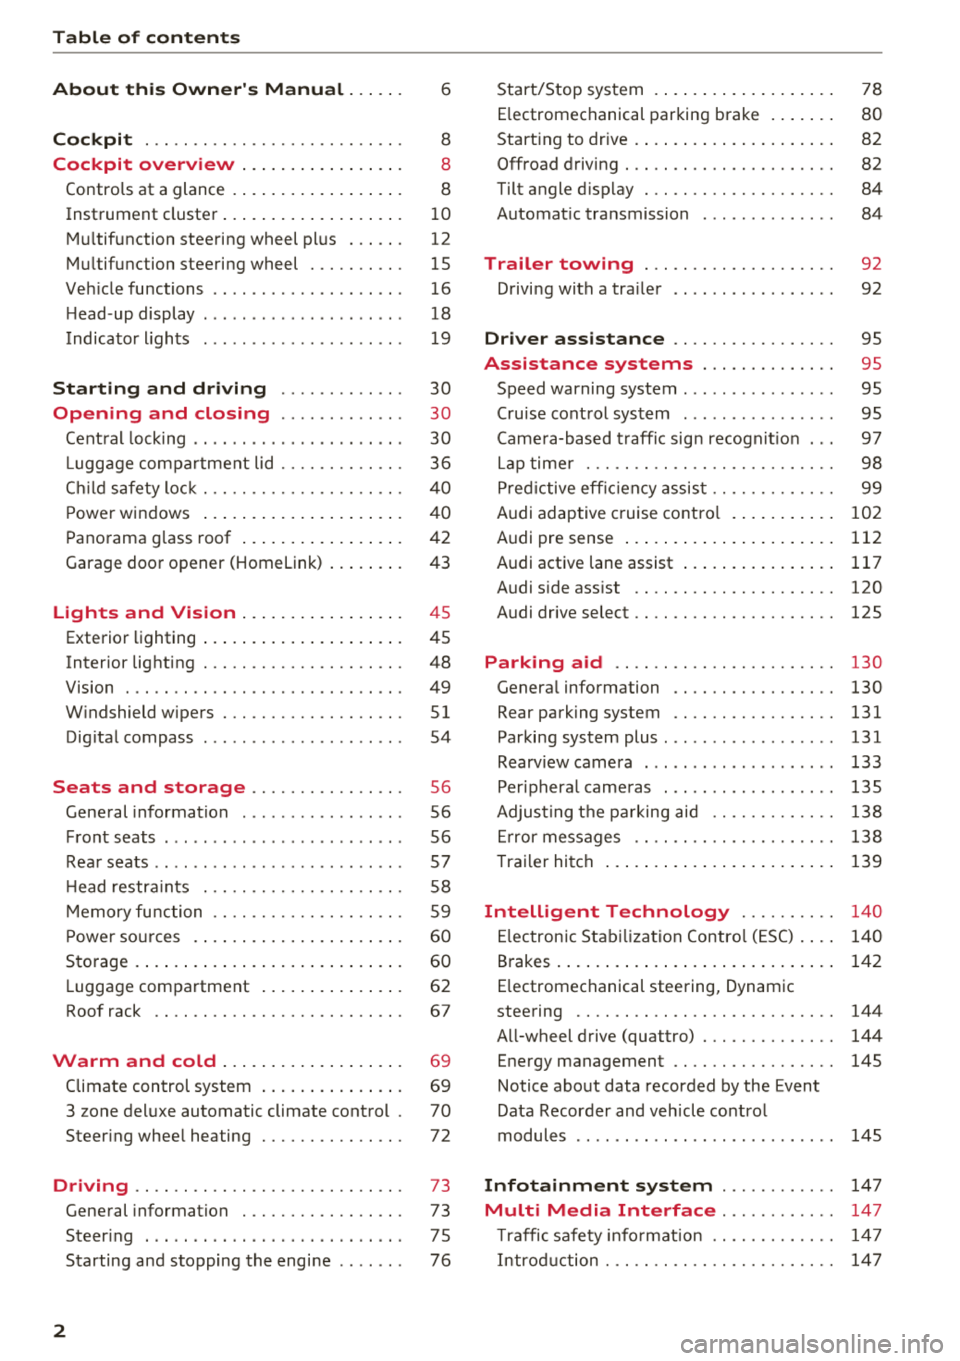 AUDI Q5 2018  Owners Manual Table of  contents 
About  this  Owners  Manual.  . .  . . . 
6 
Cockpit  . . .  . .  . . . . . . . . . . . . . . .  . . . .  . .  . 8 
Cockpit  overview  . .  . . . . .  . . .  . .  . .  . . . 8 
Co